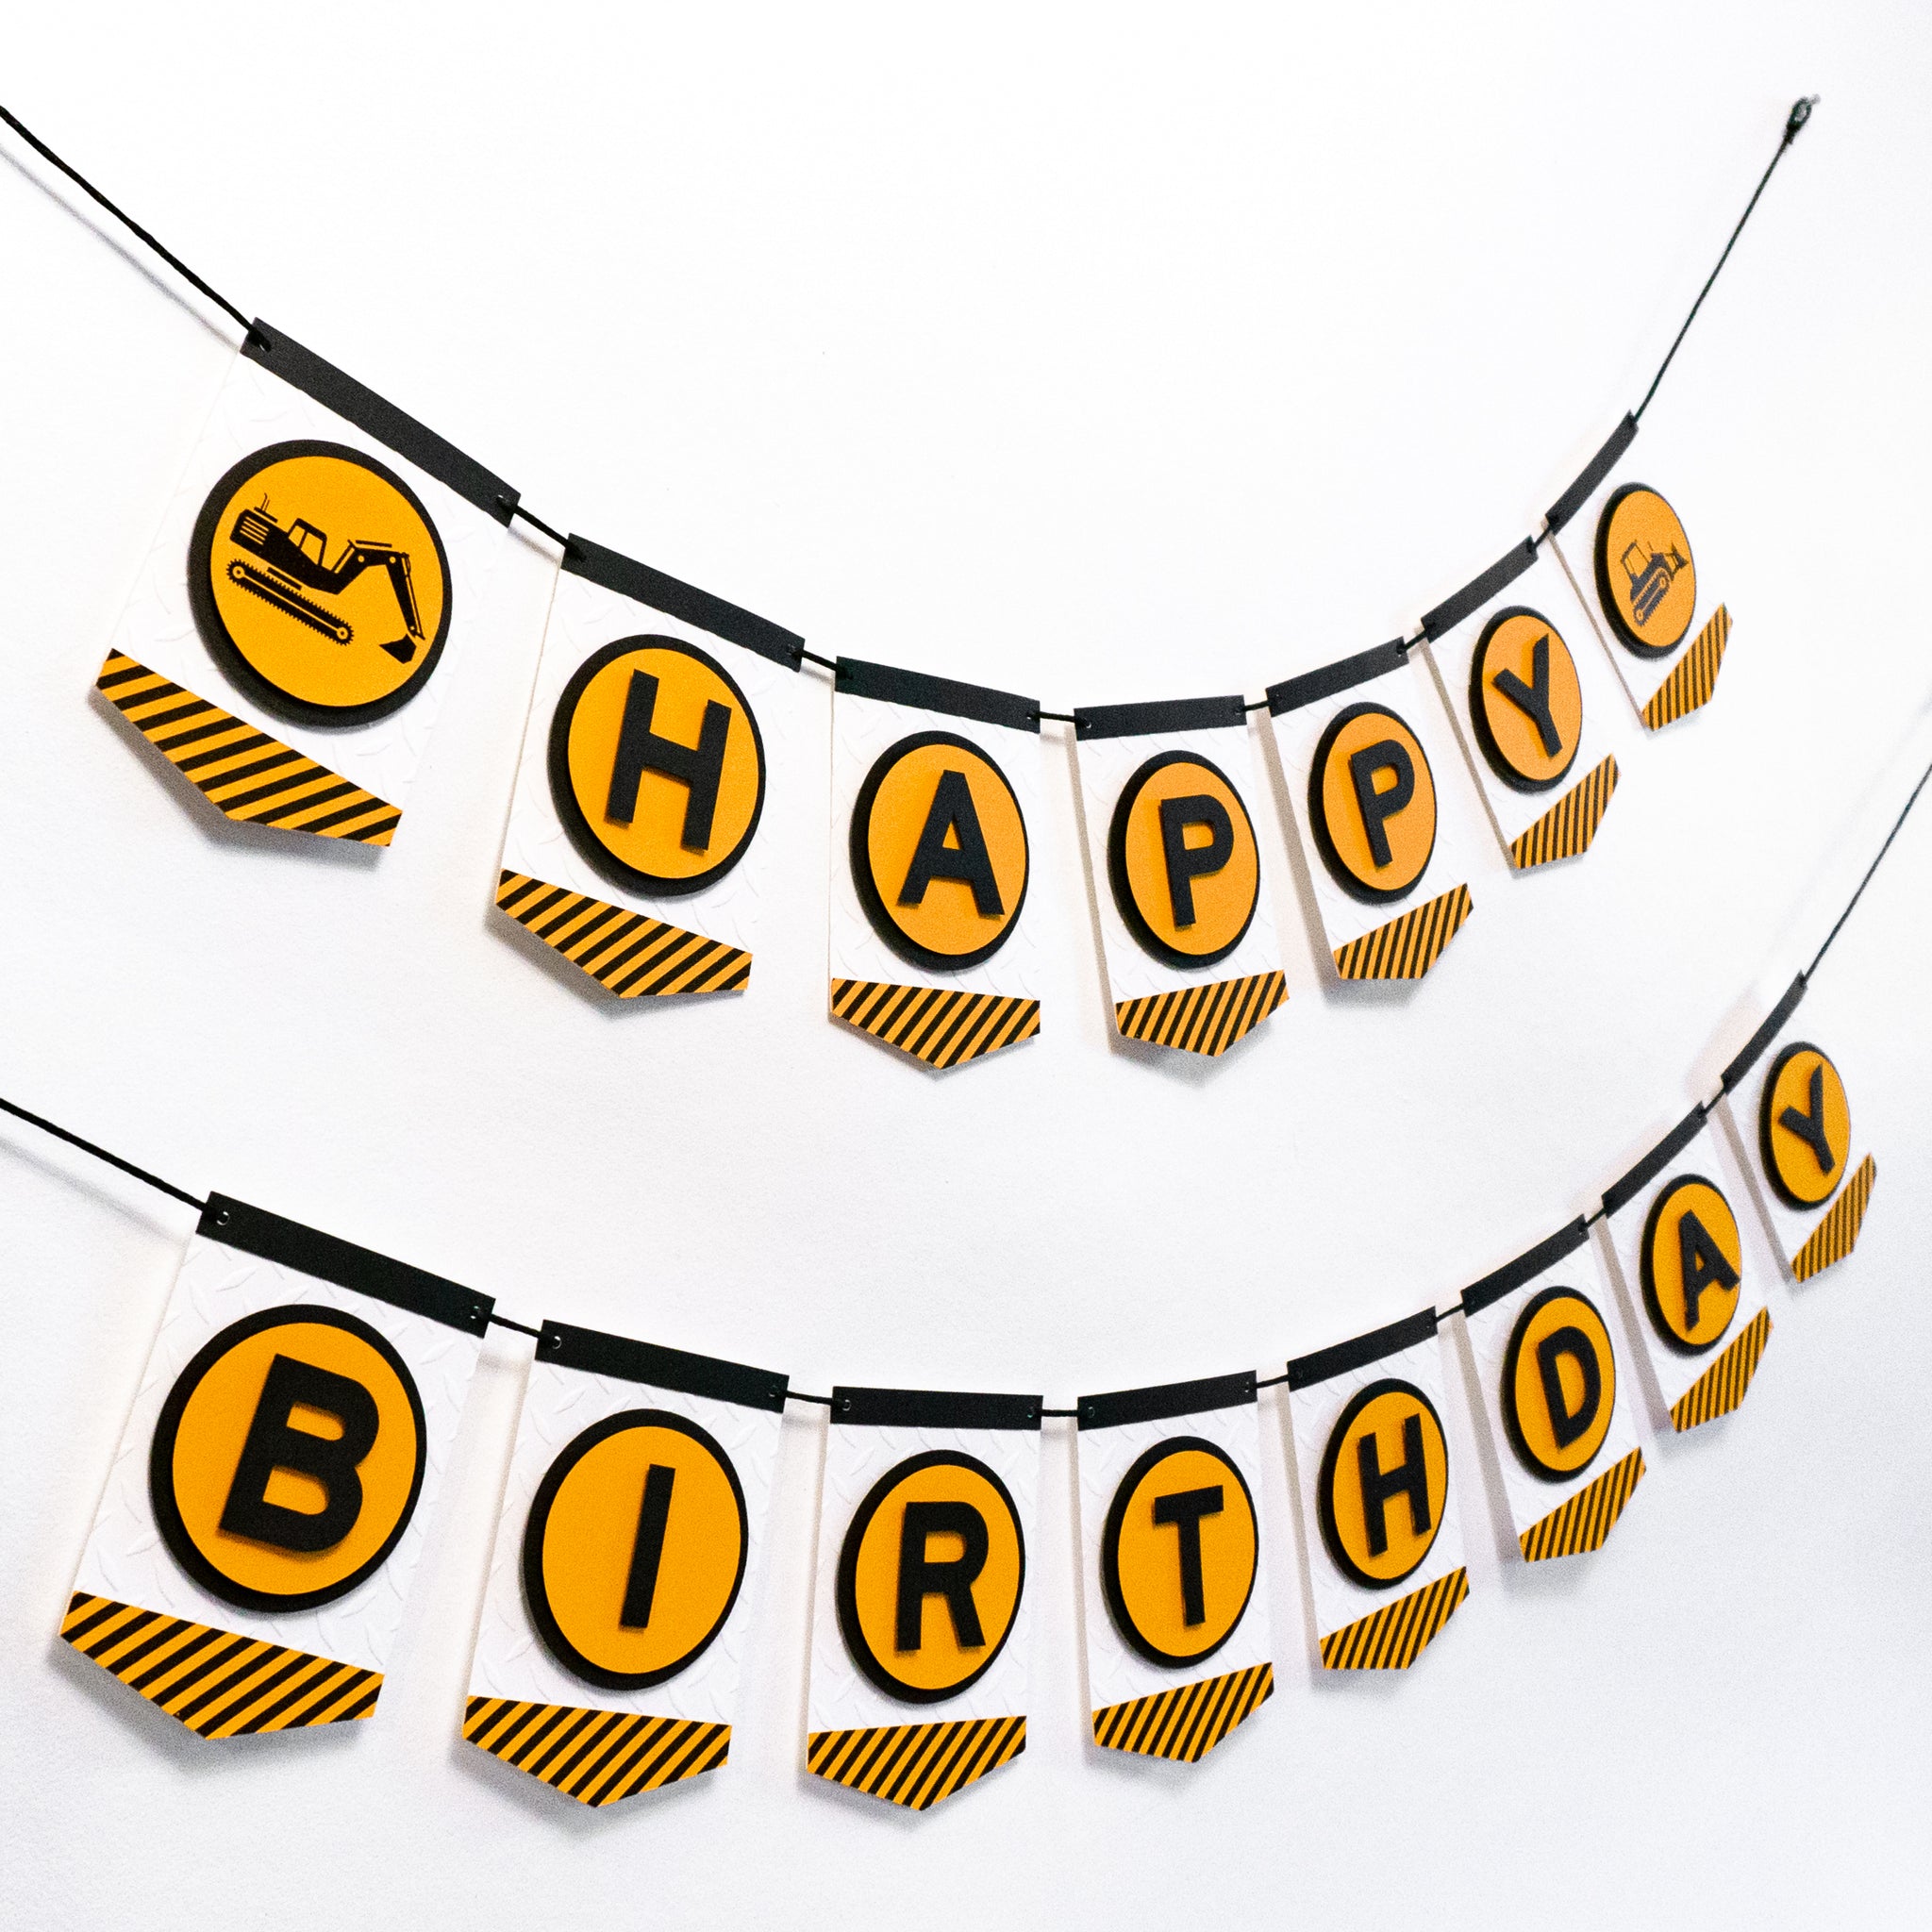 A construction zone themed happy birthday banner. Each letter is in an orange circle and on a separate pennant. Strung on a black cord.